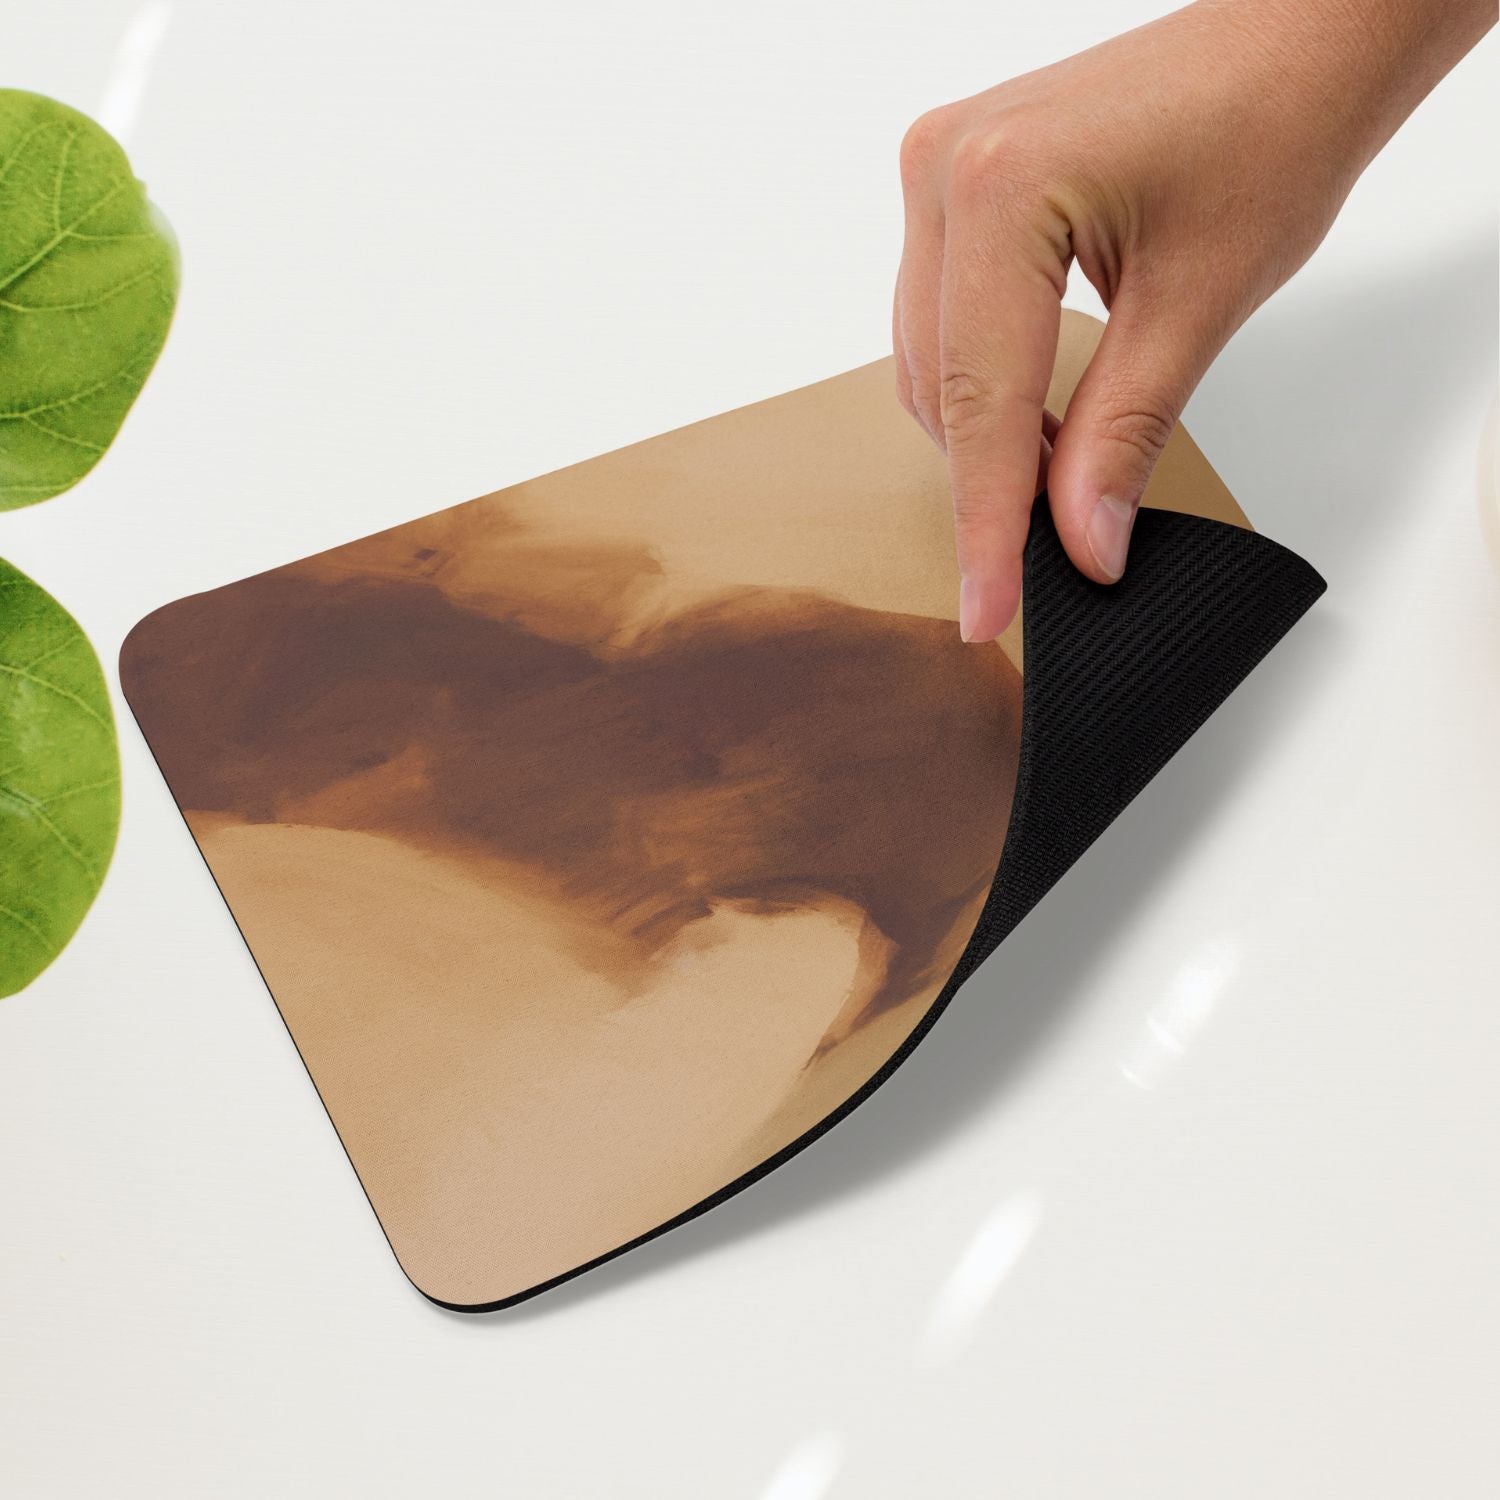 Clay, colorful mouse pad for styling your office desk. Featuring artwork by Parima Studio. Home office styling accessories, cubicle styling accessories.